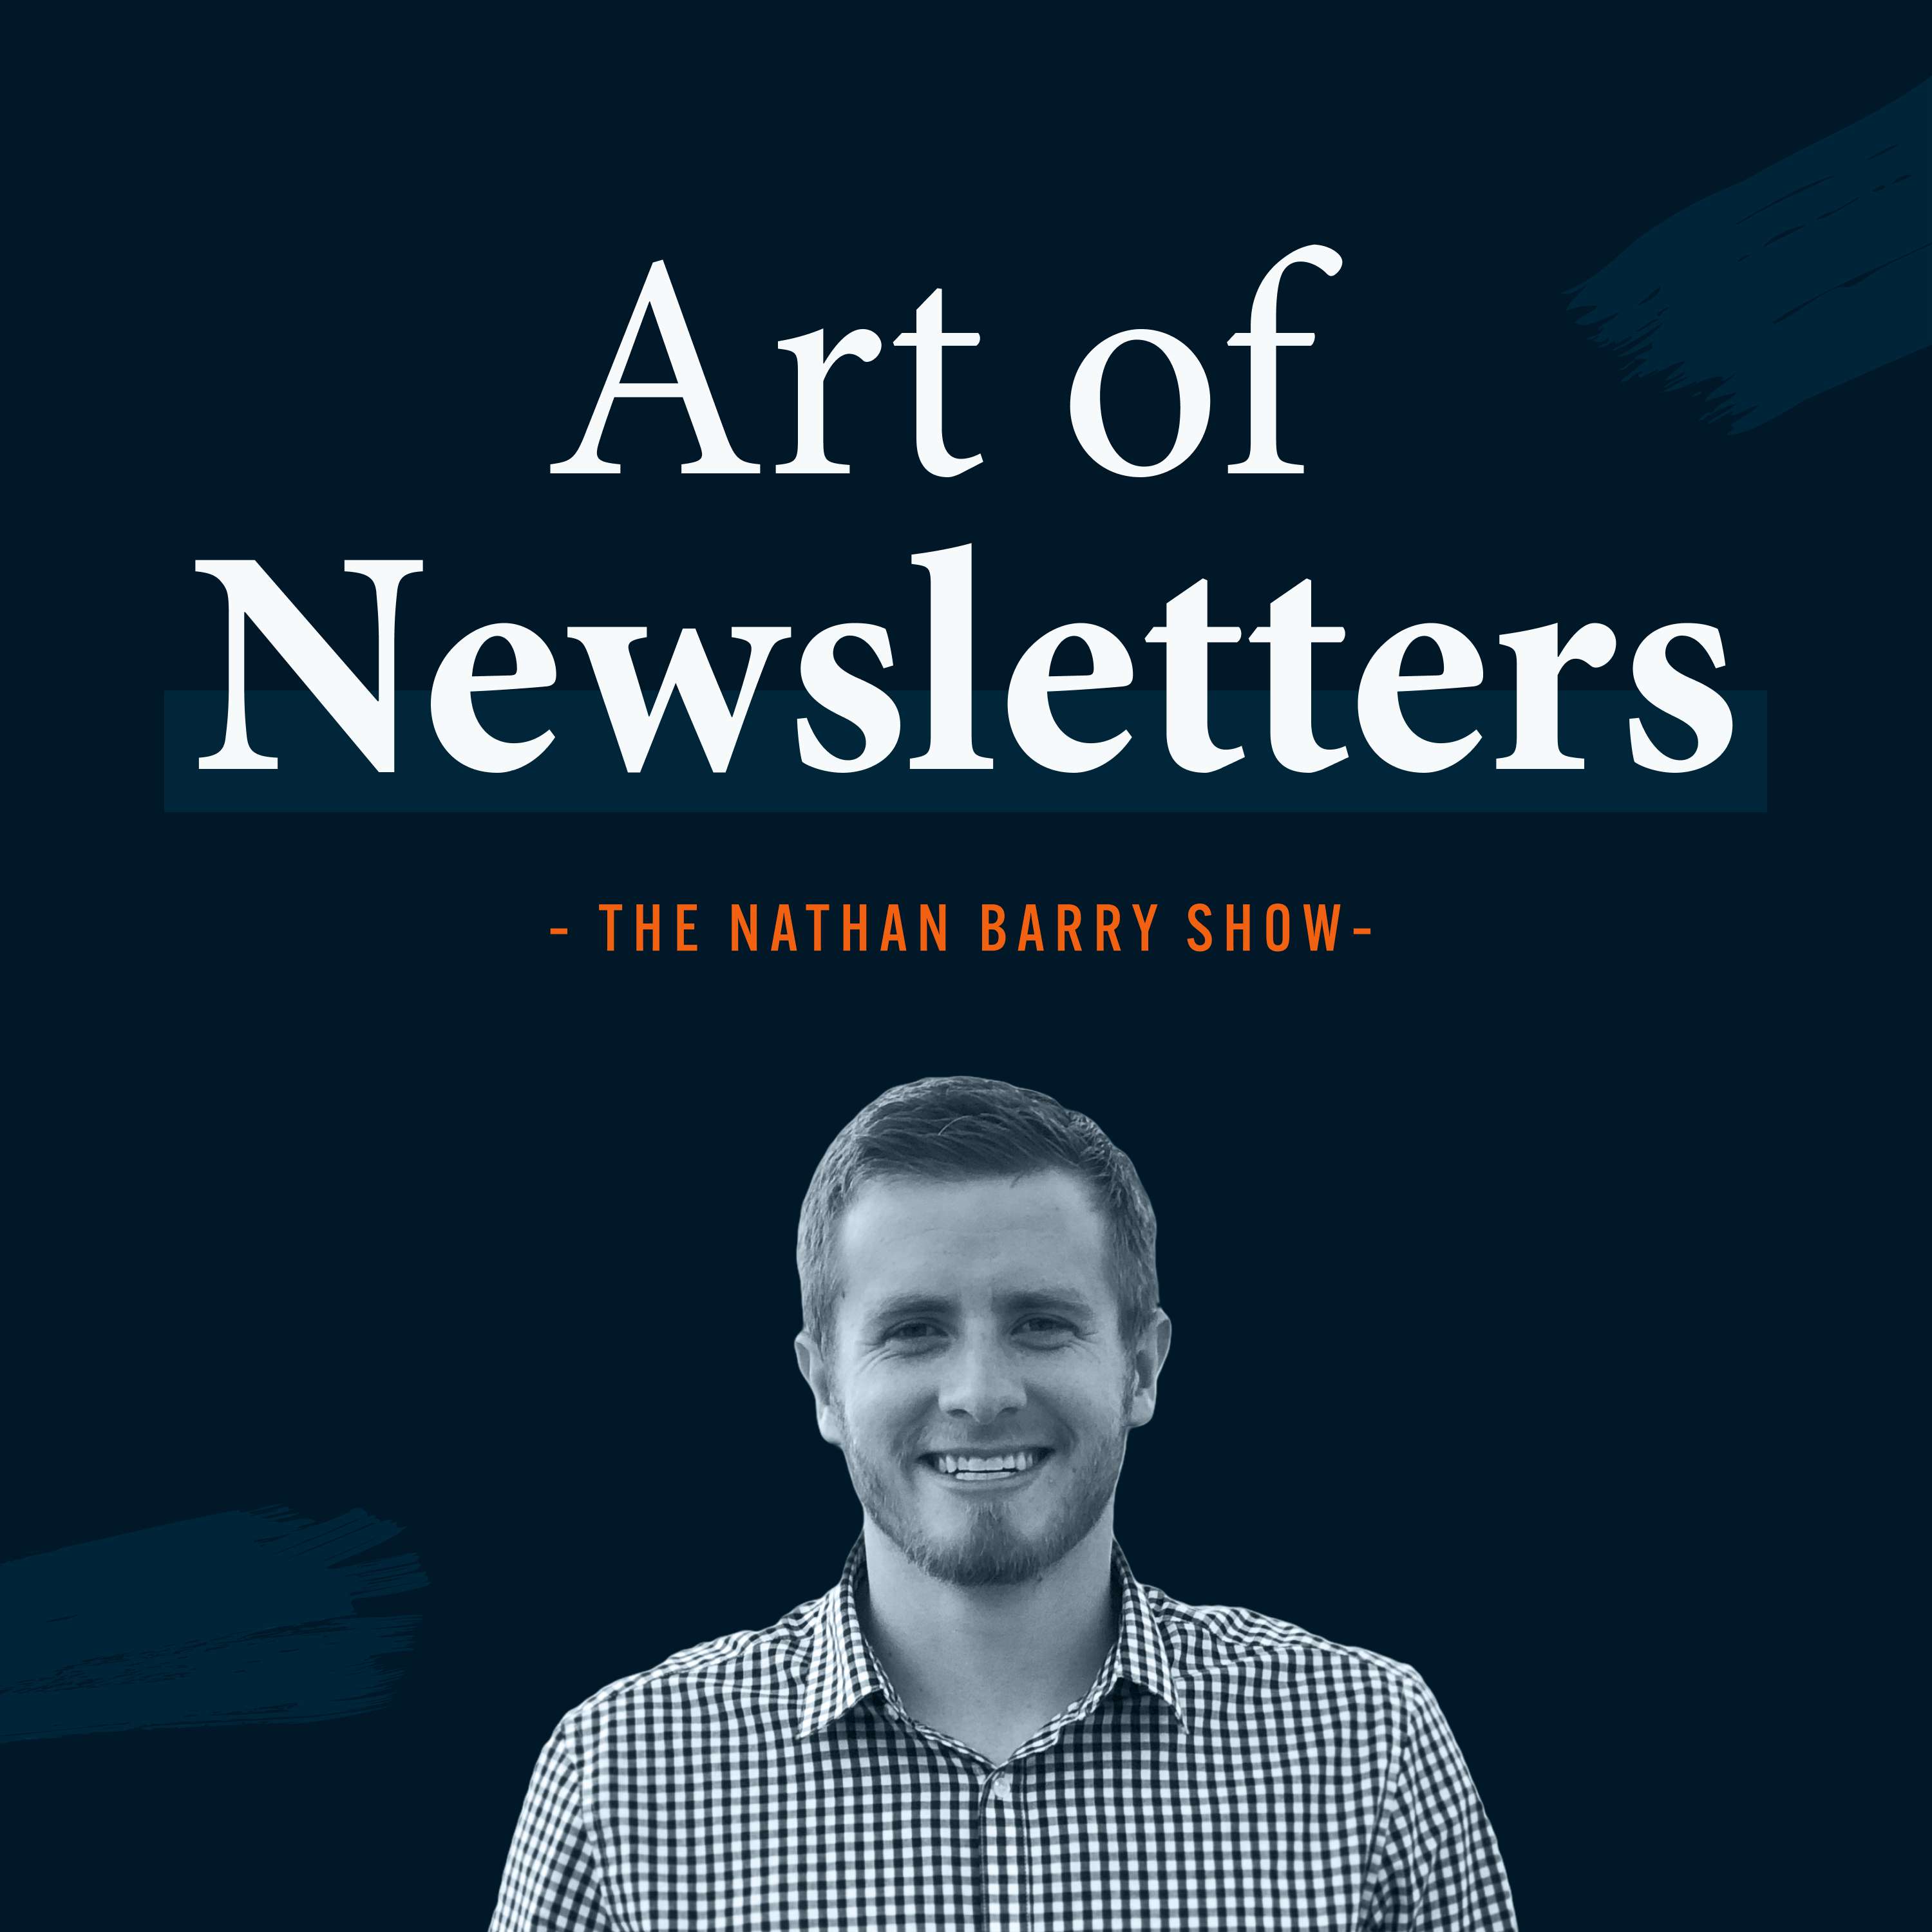 020: Dan Runcie - From Sending Newsletters to High-Paid Consulting